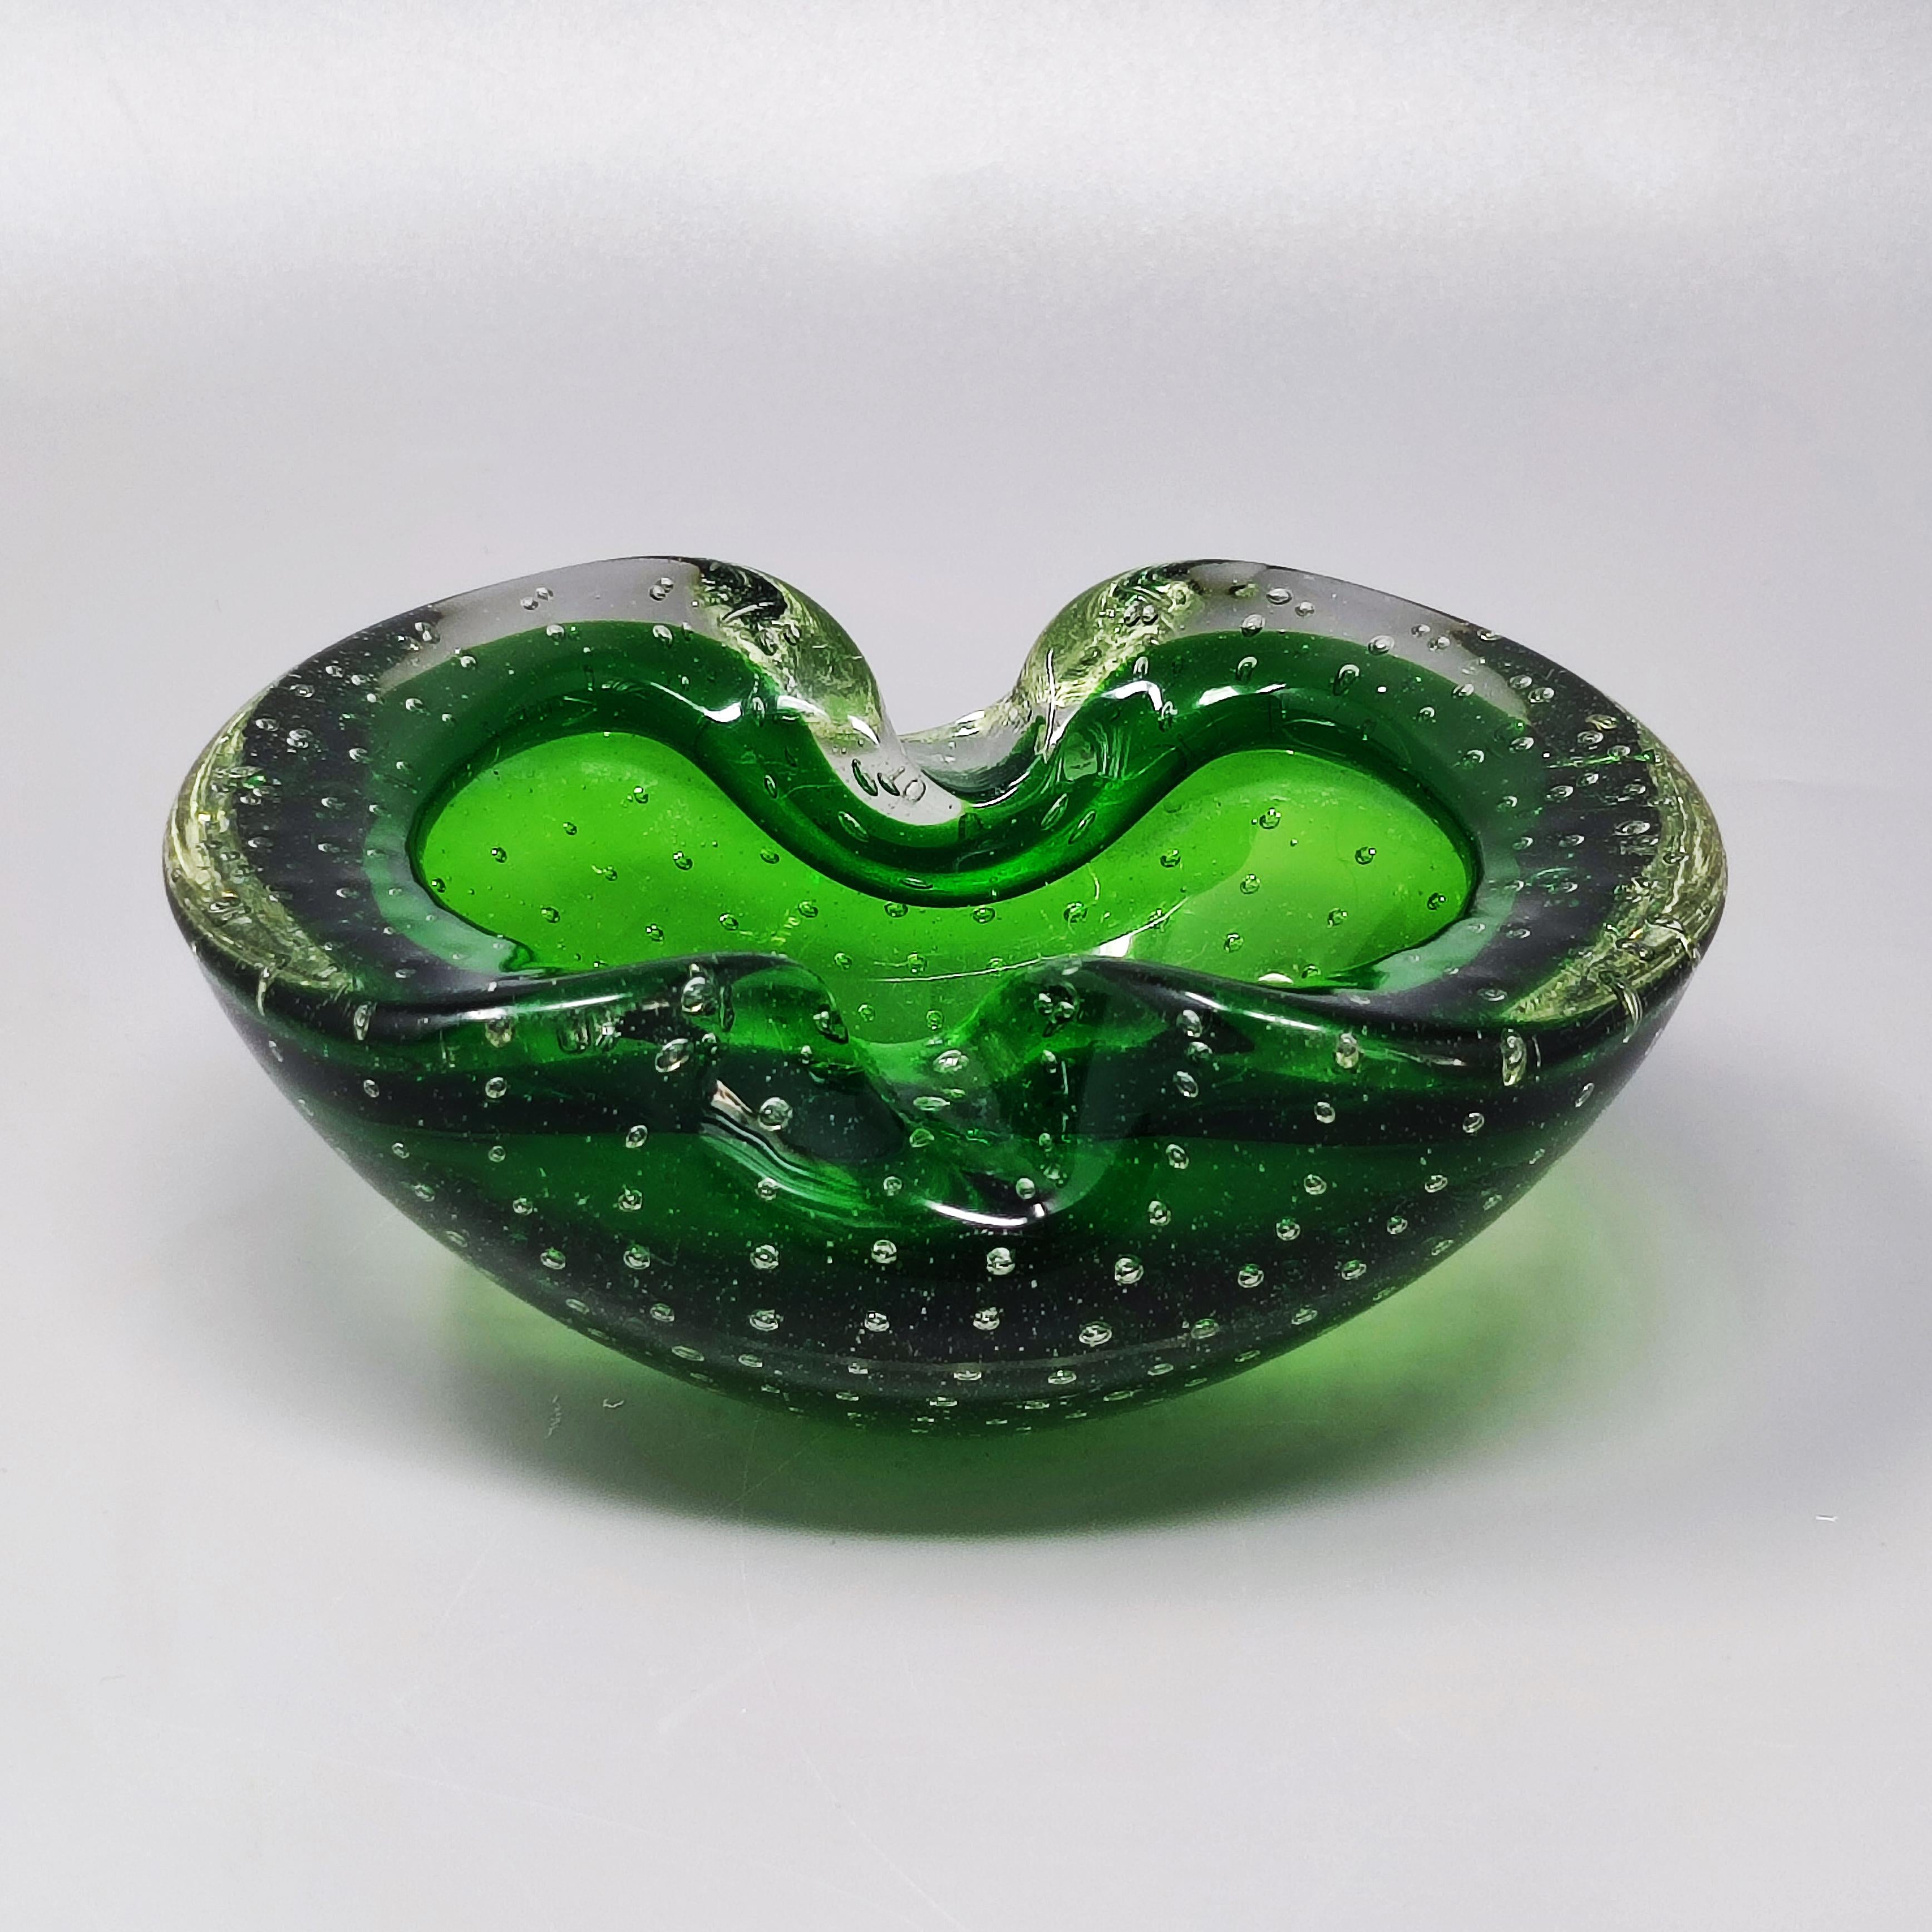 1960s Astonishing green ashtray / vide poche by Flavio Poli for Seguso in Murano Sommerso glass. Made in Italy.
The item is in excellent condition.
Dimensions:
5,11 